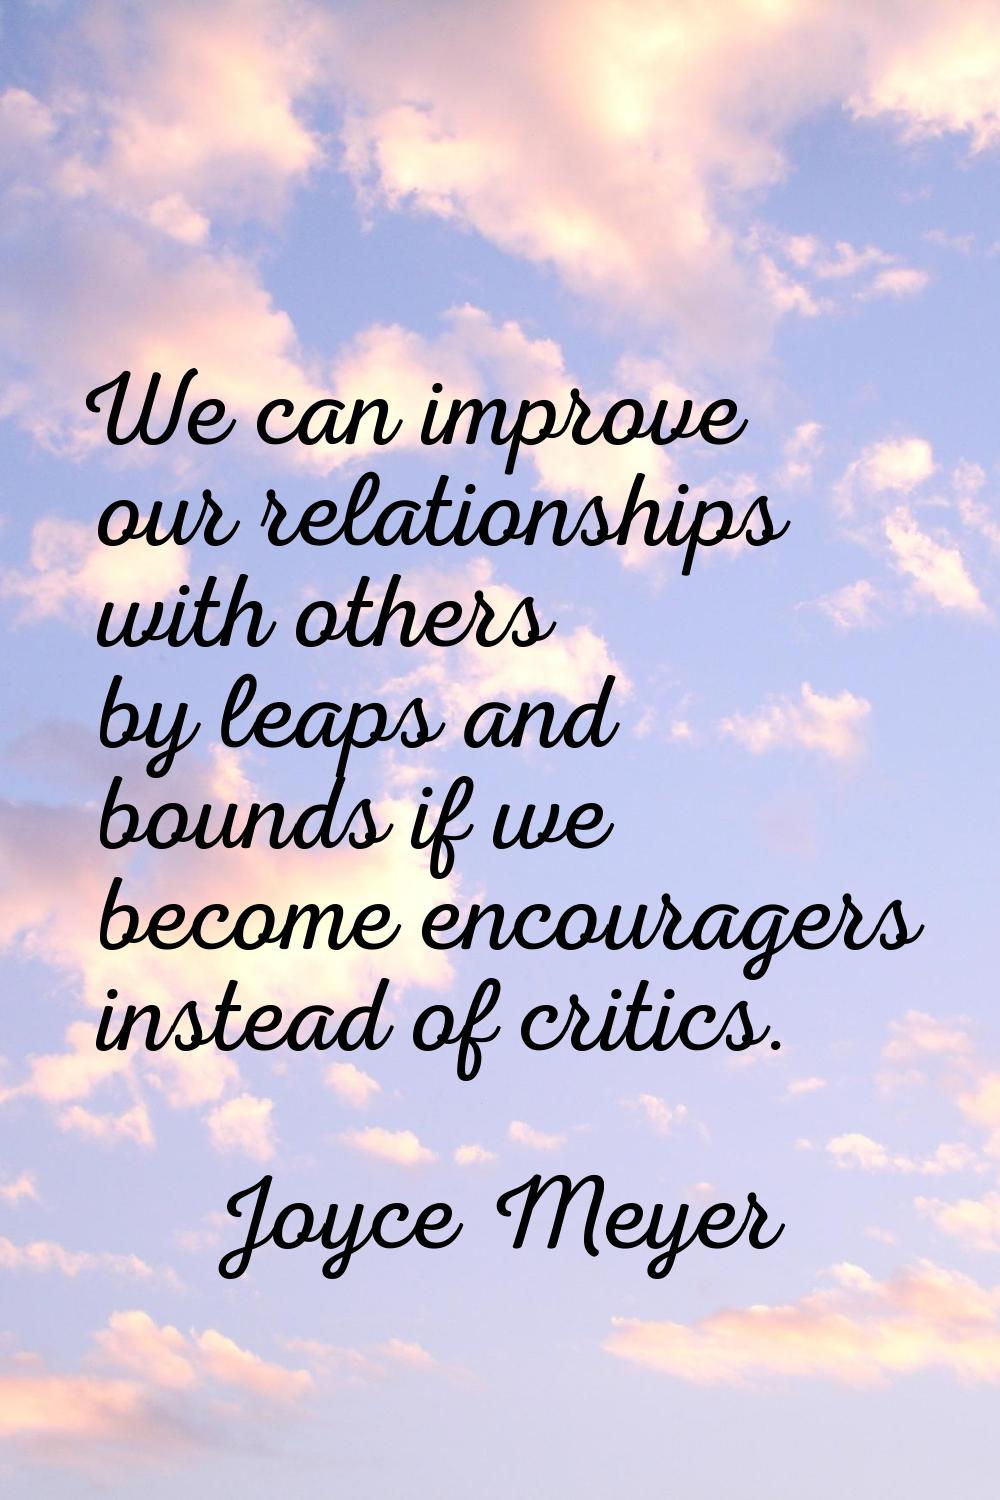 We can improve our relationships with others by leaps and bounds if we become encouragers instead o